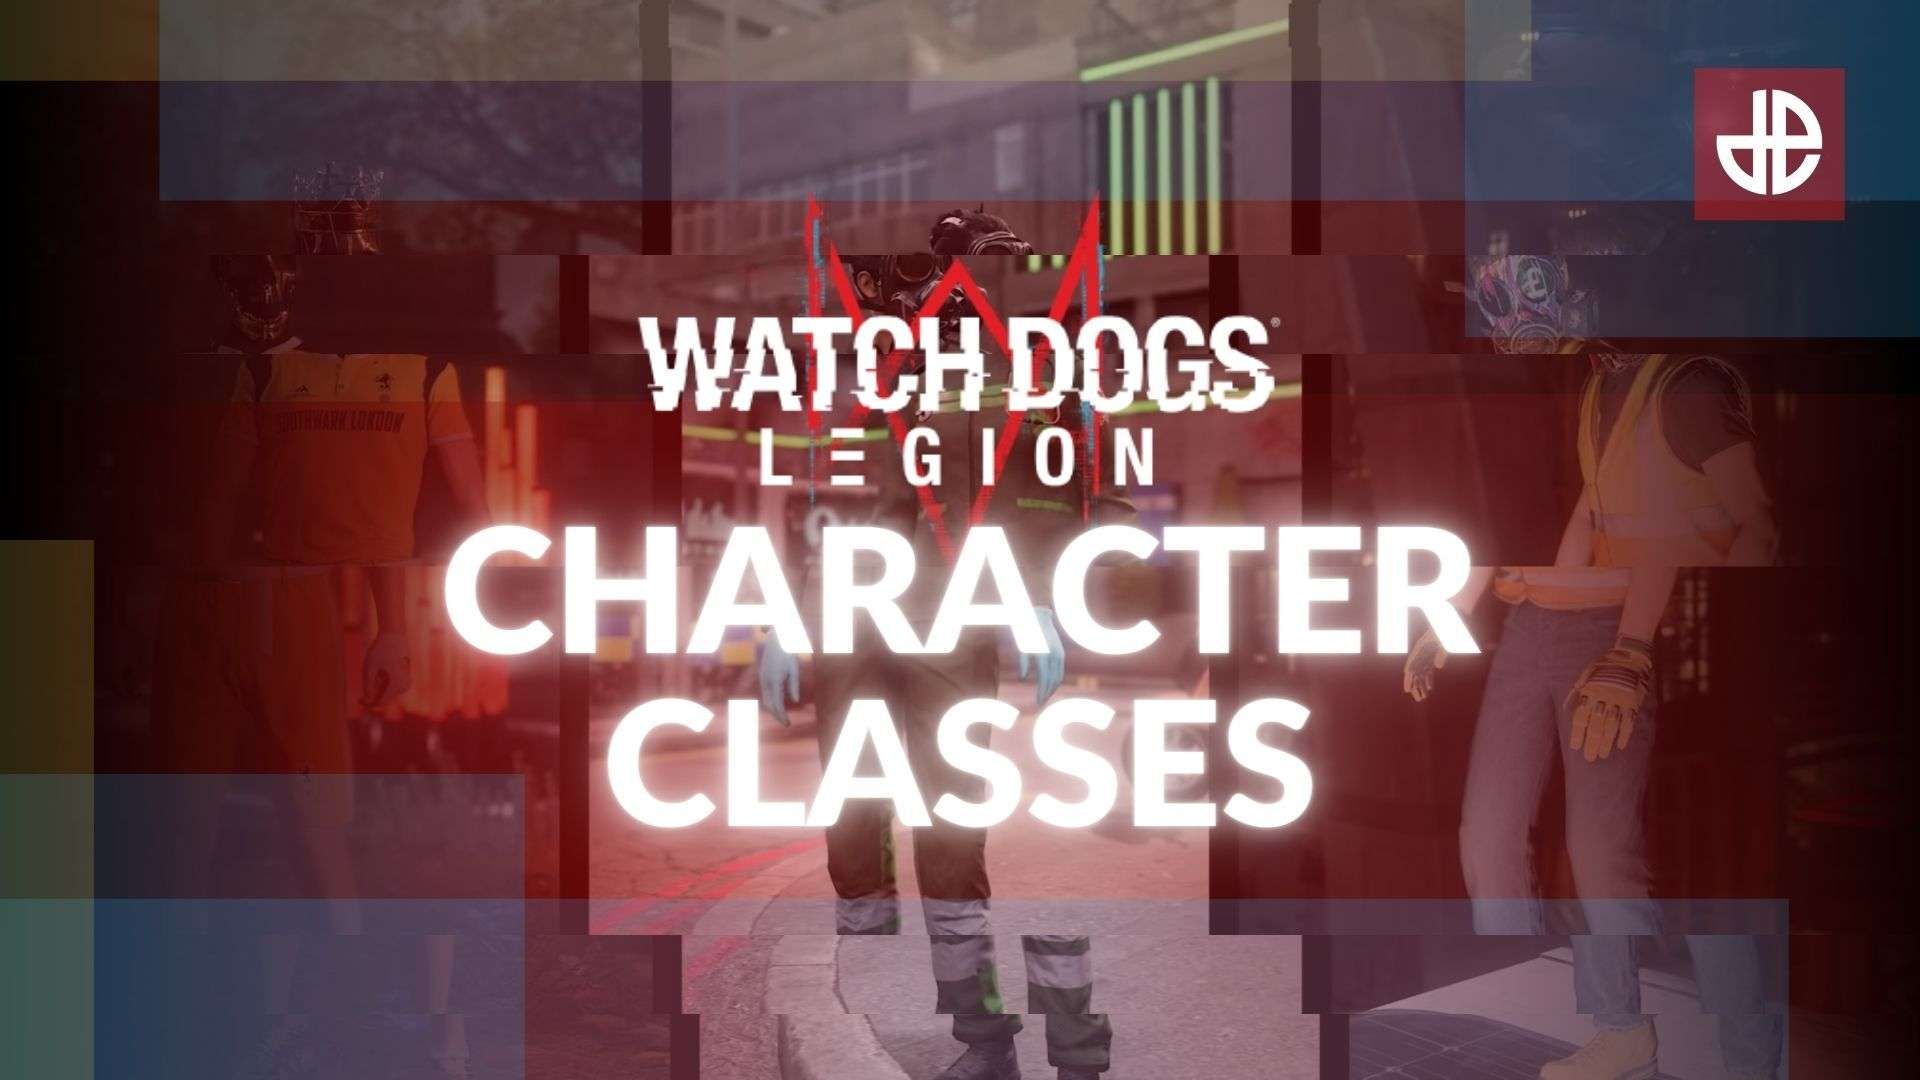 Watch Dogs Legion Character Classes Image